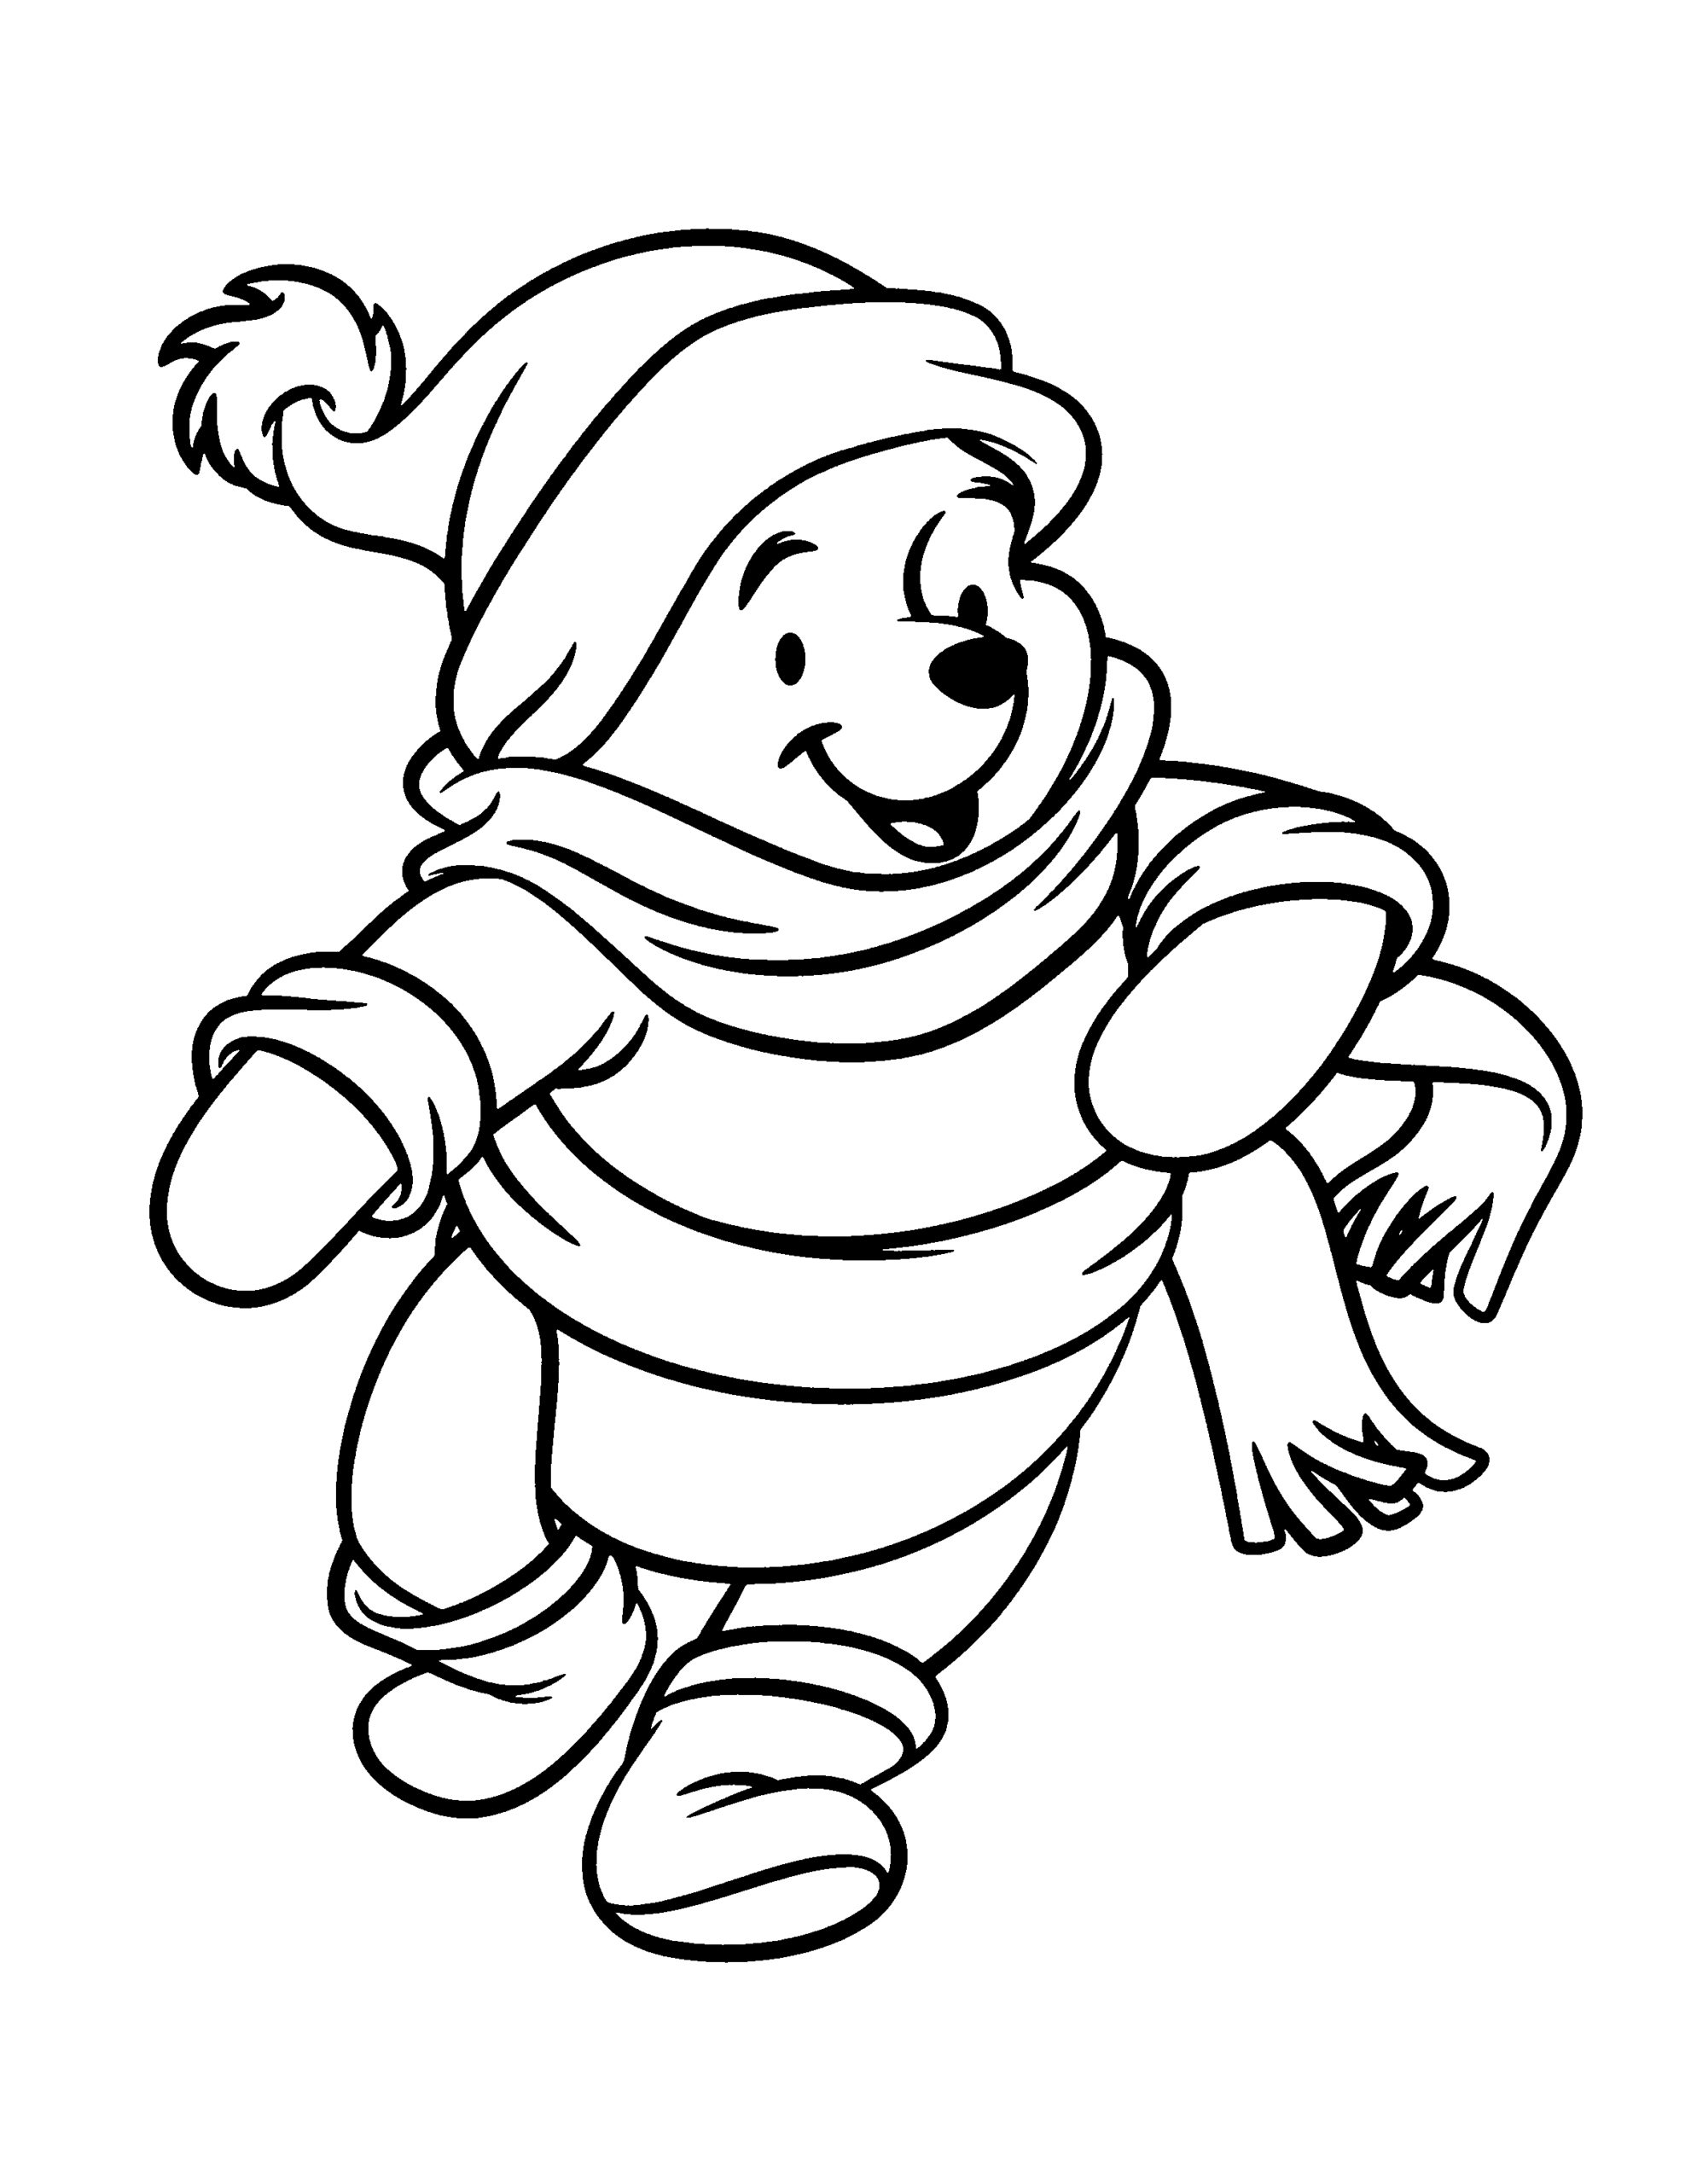 Winnie the Pooh Coloring Pages Cartoons Pooh Printable 2020 6998 Coloring4free